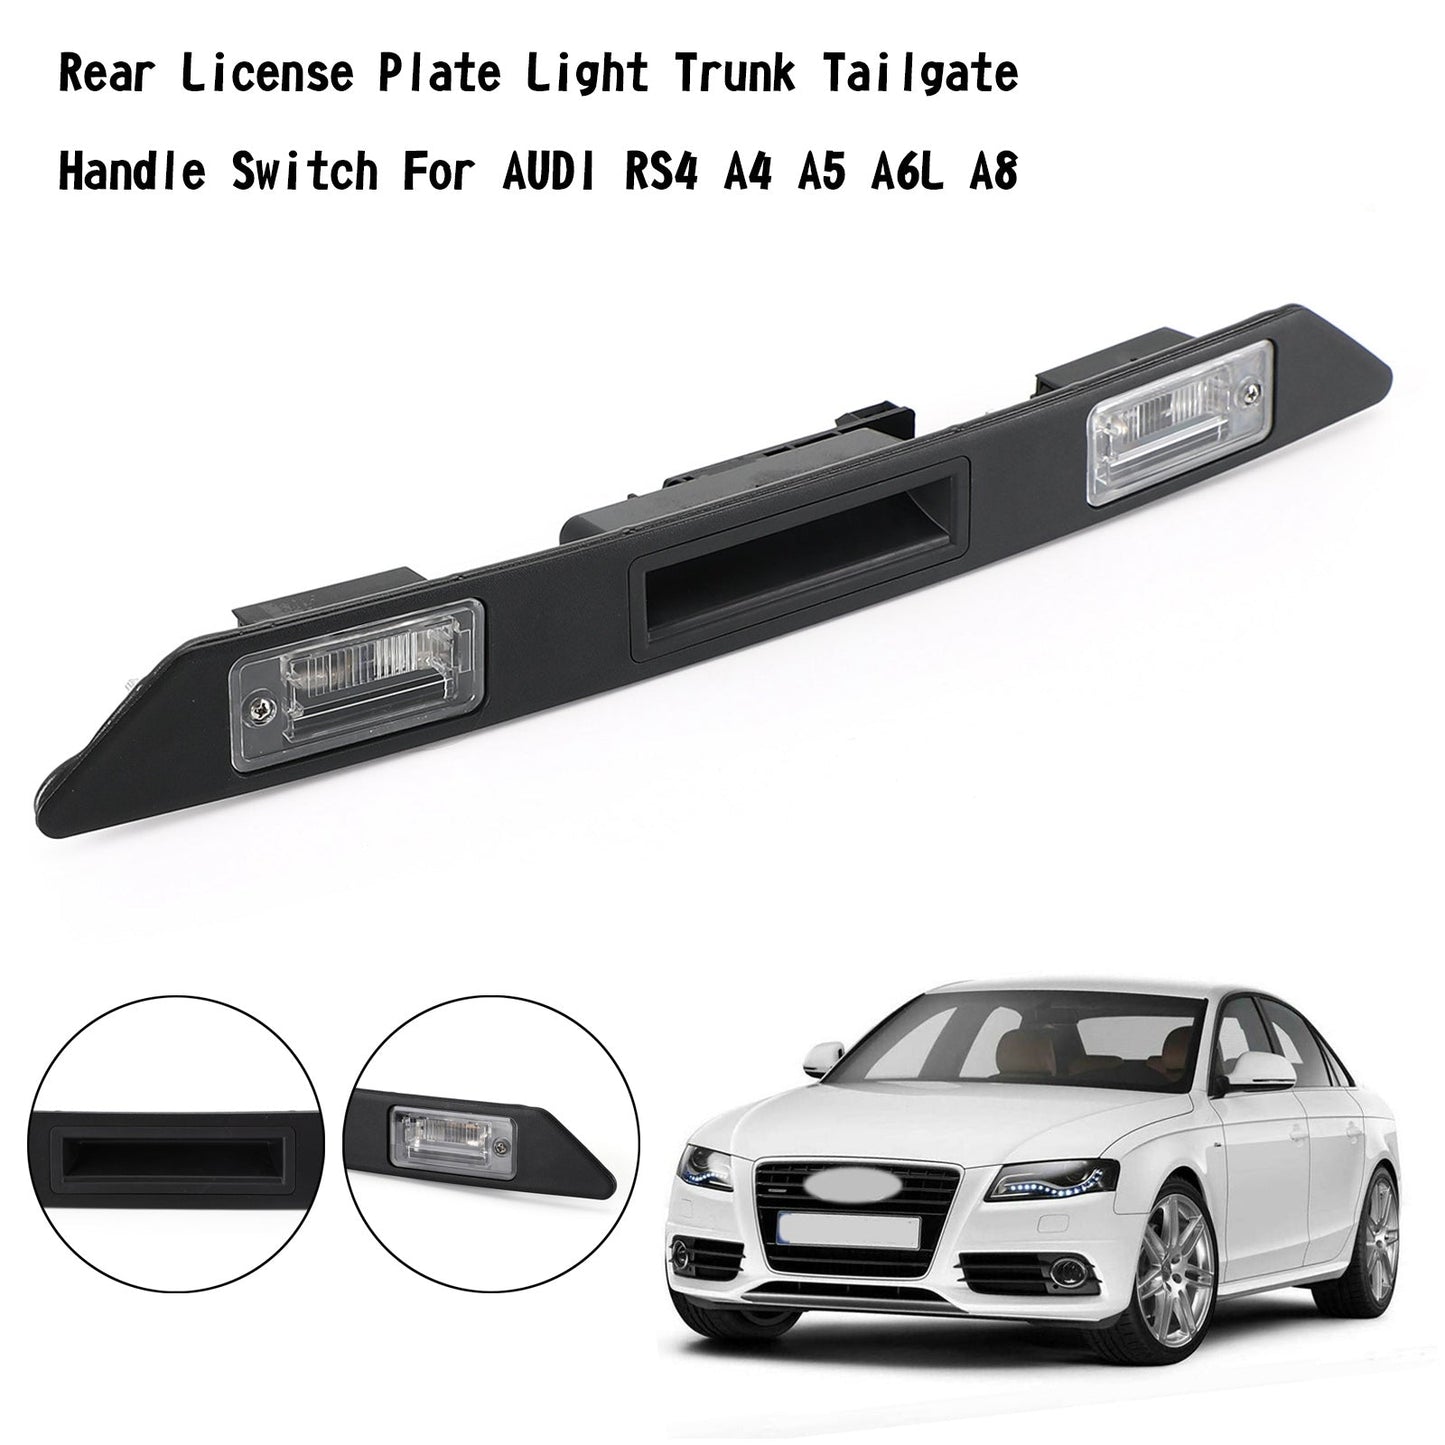 2005-2011 Audi A6/S6 Models Rear License Plate Light Trunk Tailgate Handle Switch 8P48275743FZ